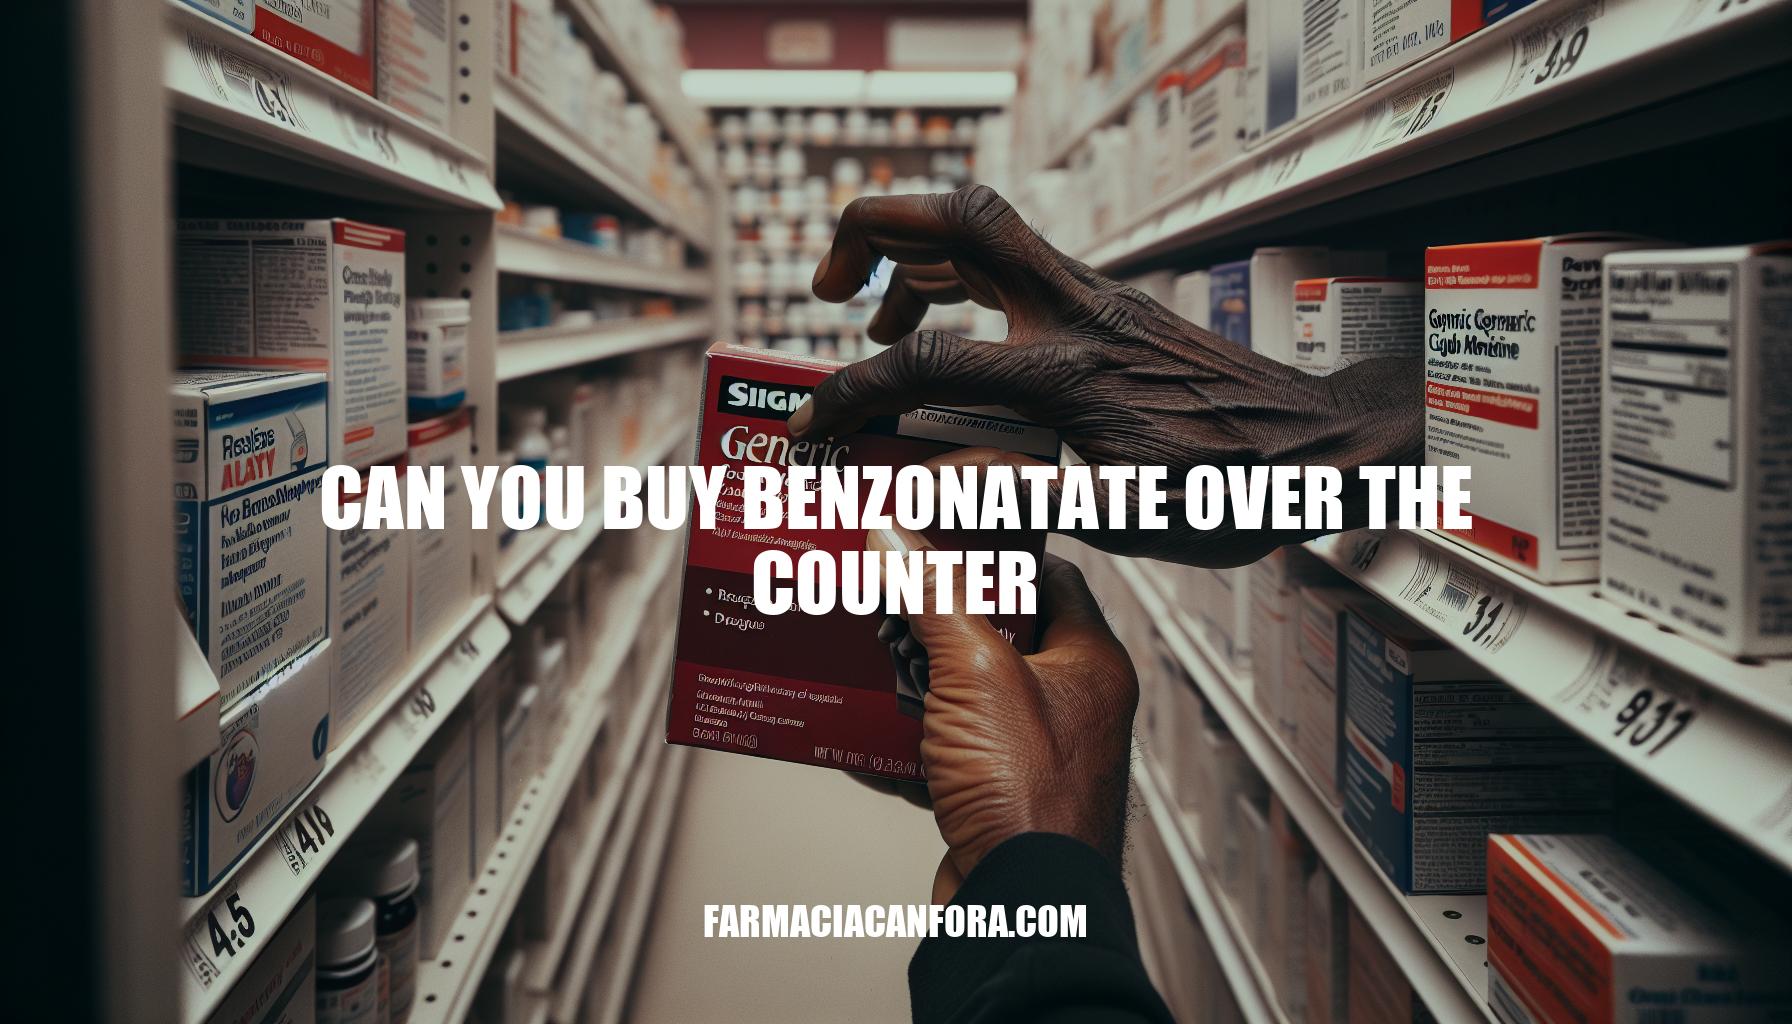 Can You Buy Benzonatate Over the Counter